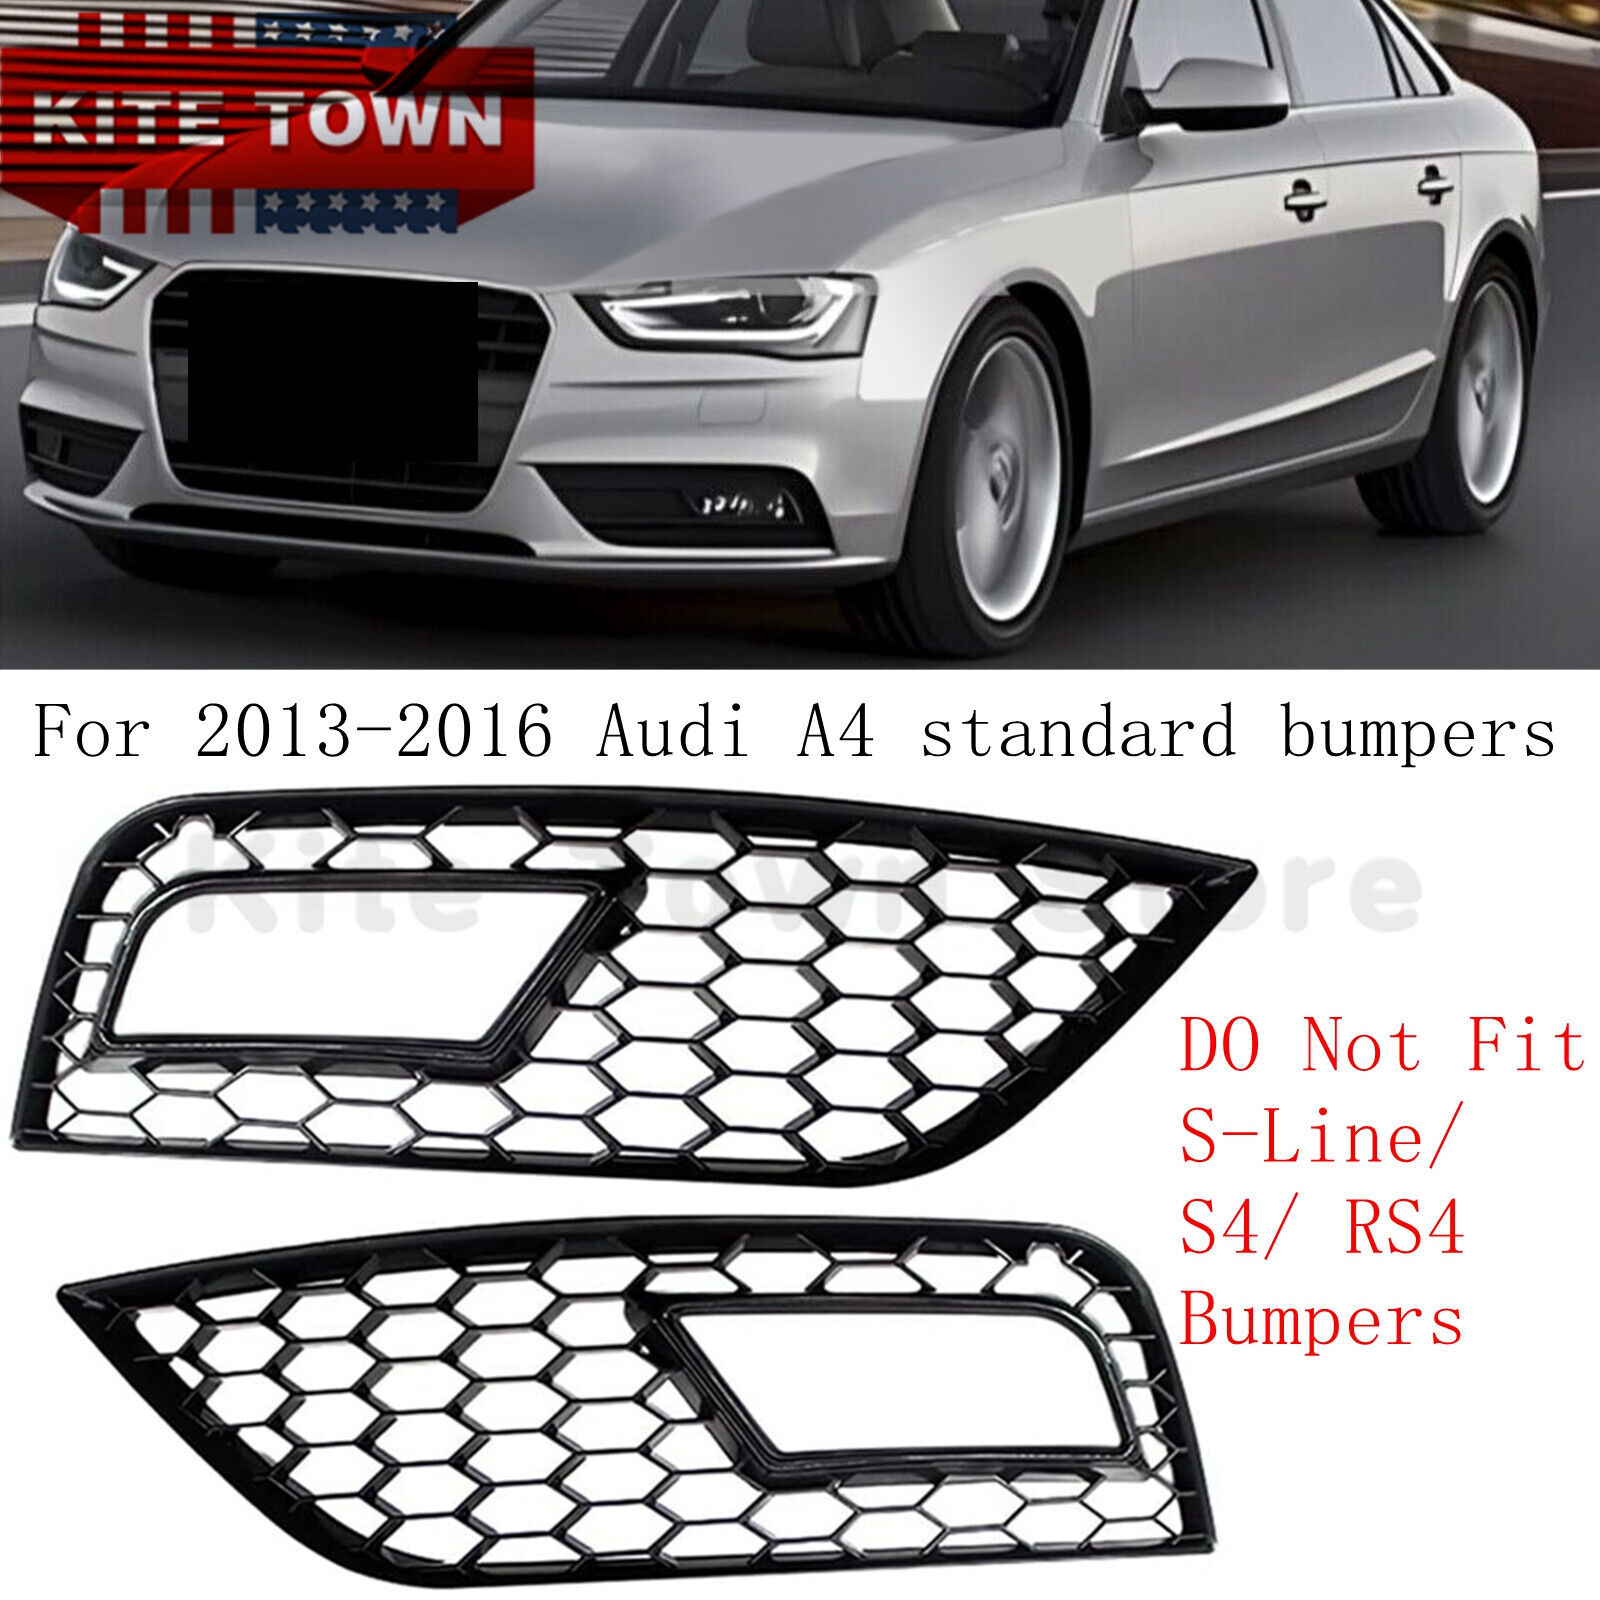 Pair Honeycomb Style Fog Light Cover For 2013-2016 Audi A4 B8.5 standard bumpers